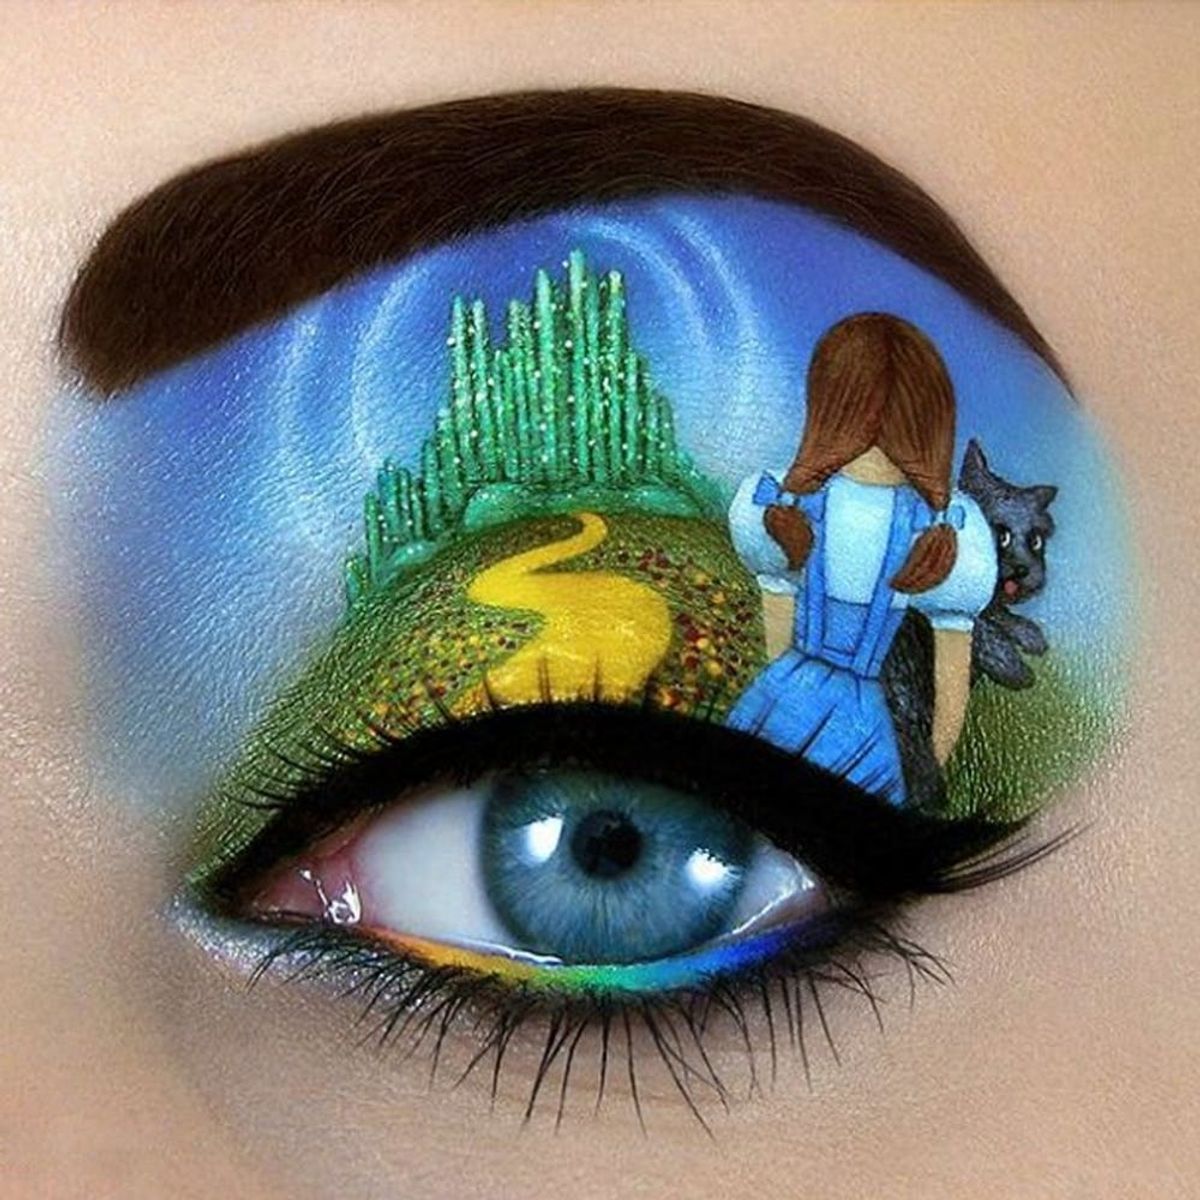 This Makeup Artist’s Insane Eyelid Art Will Blow Your Mind